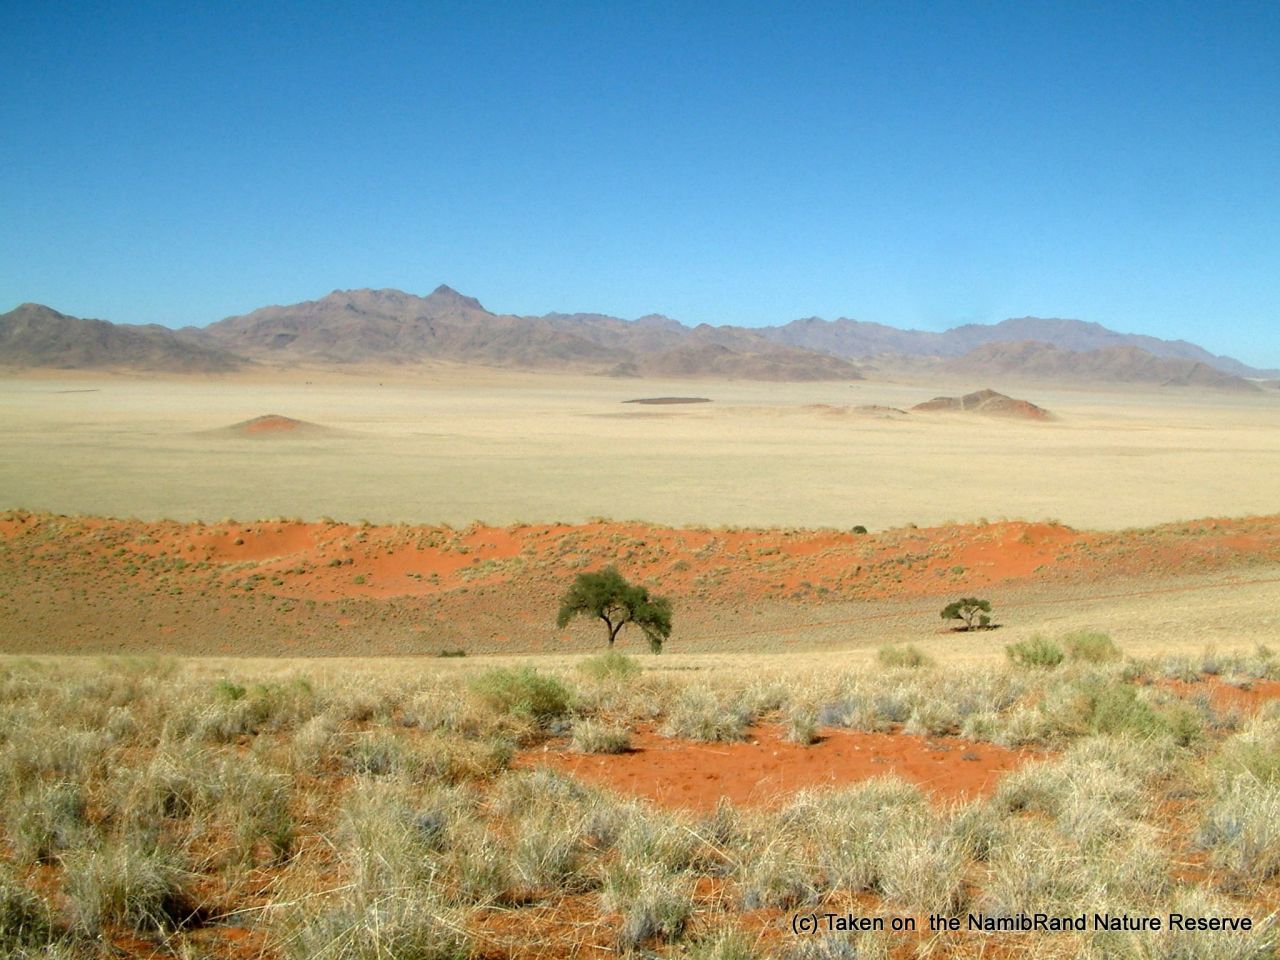 In arid climates, where water is scarce and soil nutrient-poor, plants face stiffer competition for resources. As a result, they 'organize' themselves at a distance to maximize what limited resources are available --ultimately forming strongly ordered patterns on the landscape. 